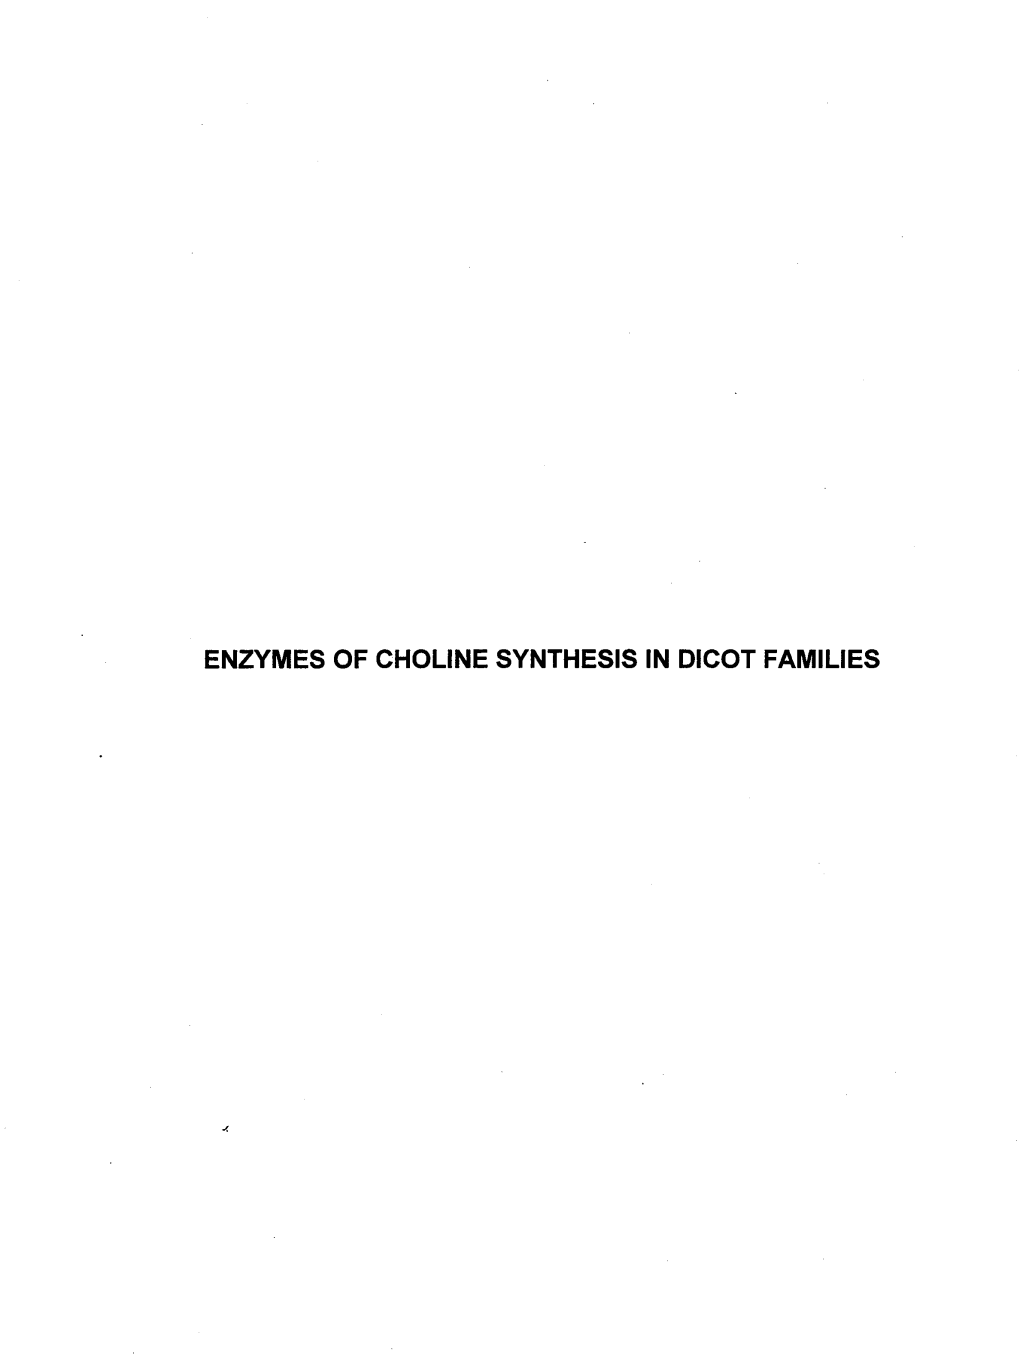 Enzymes of Choline Synthesis in Dicot Families a Comparative Biochemical Study of the Enzvmes of Choline Synthesis in Several Dicotyledon Families